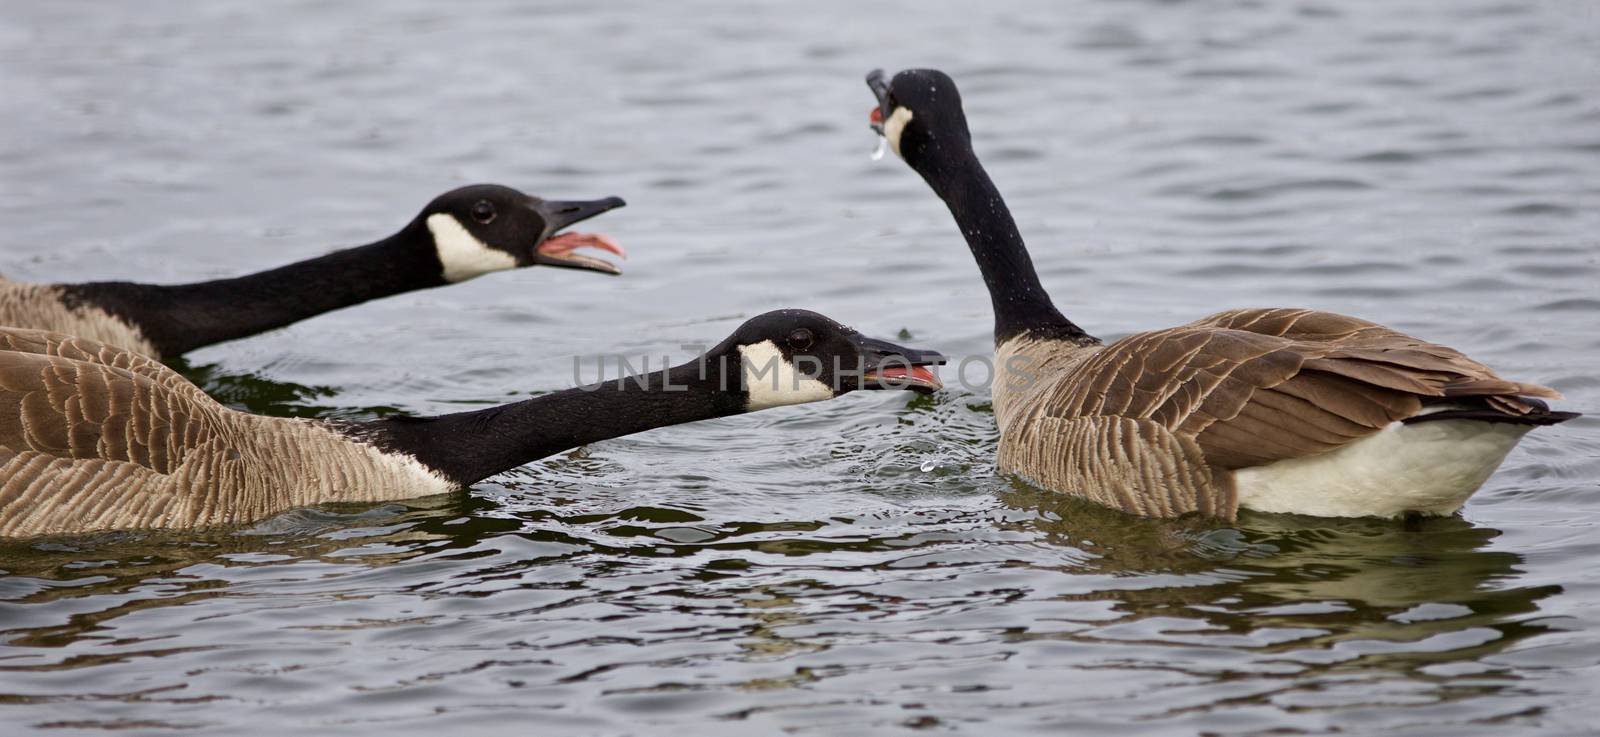 Isolated image of three screaming Canada geese in the lake by teo